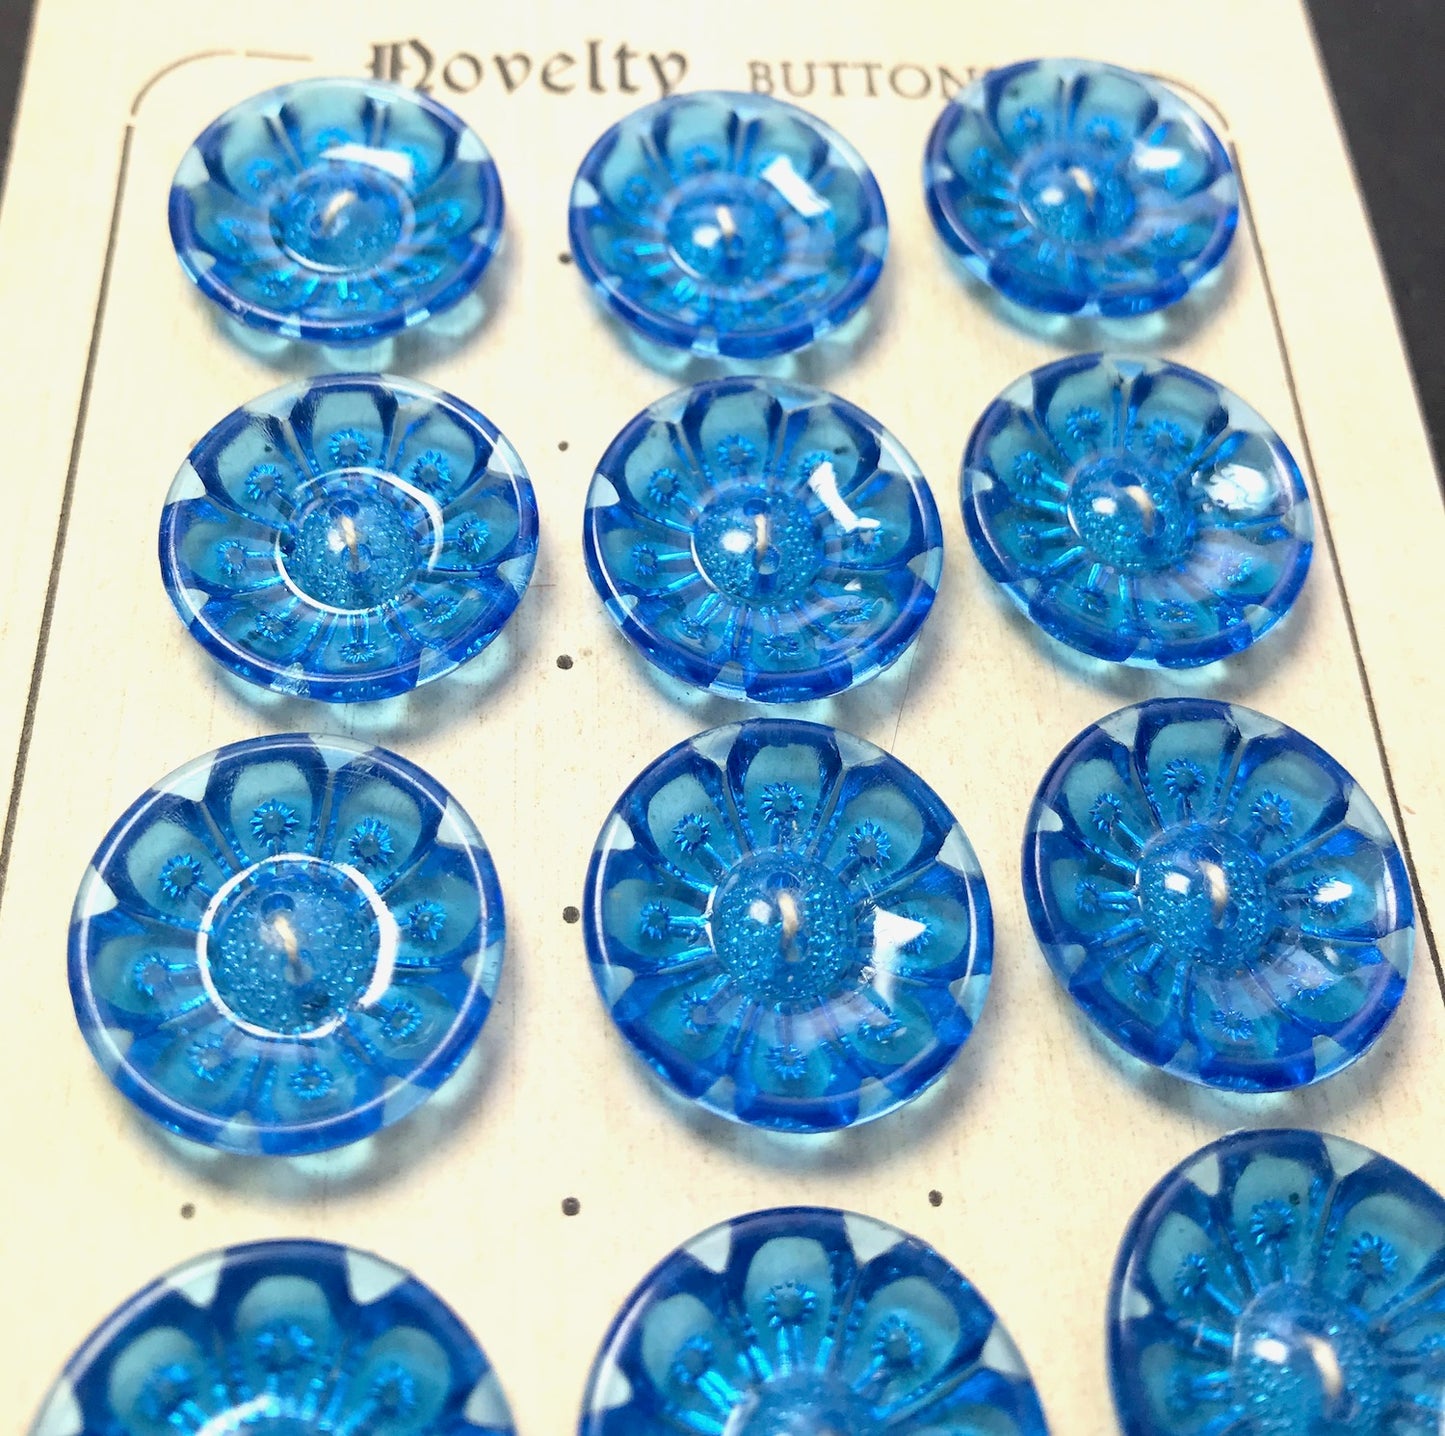 Glowing Intense Blue Vintage Flower Buttons - Different sizes and quantities 12mm -20mm